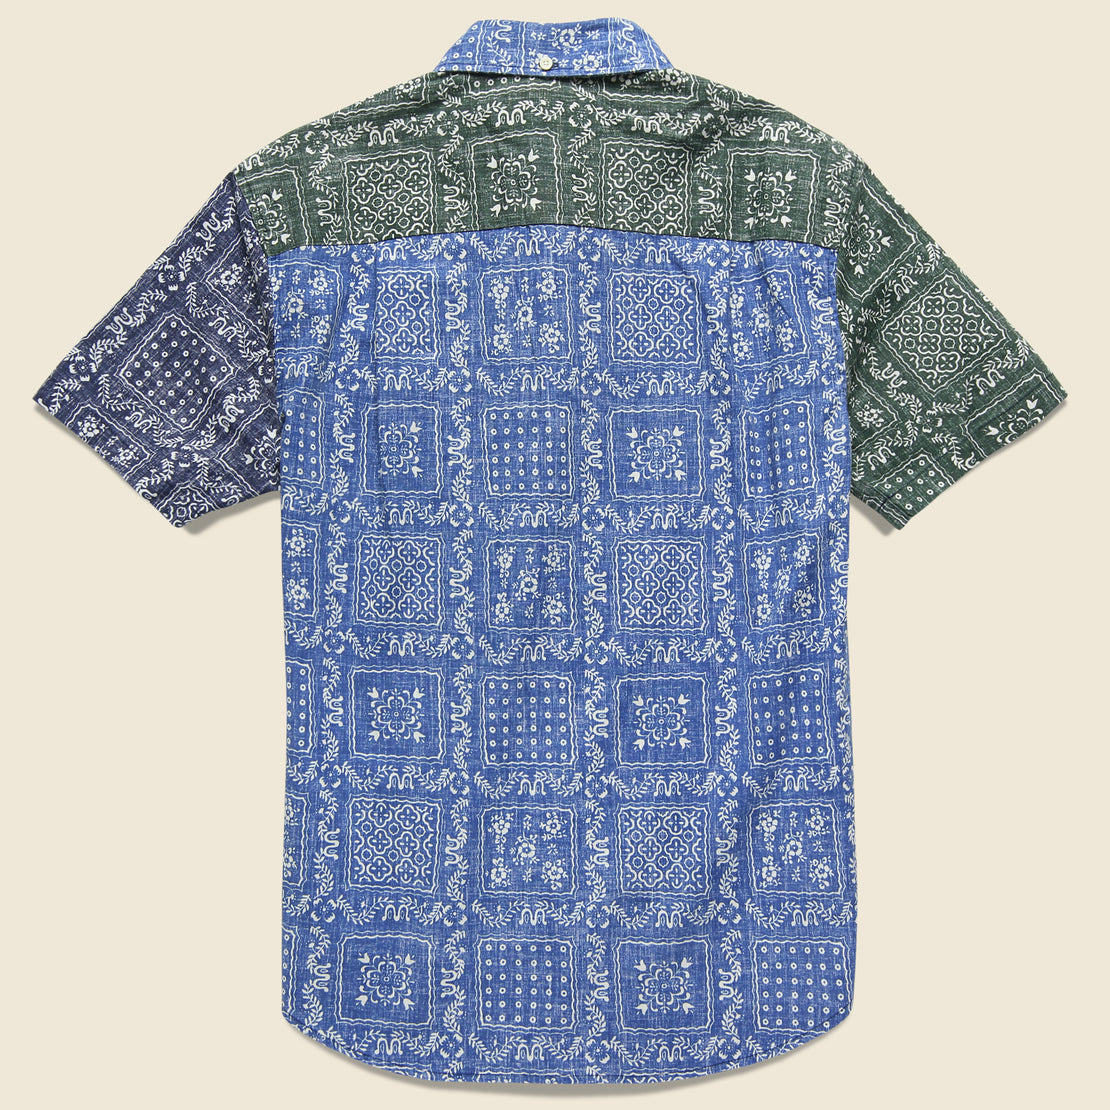 Original Lahaina Shirt - Color Block - Reyn Spooner - STAG Provisions - Tops - S/S Woven - Other Pattern